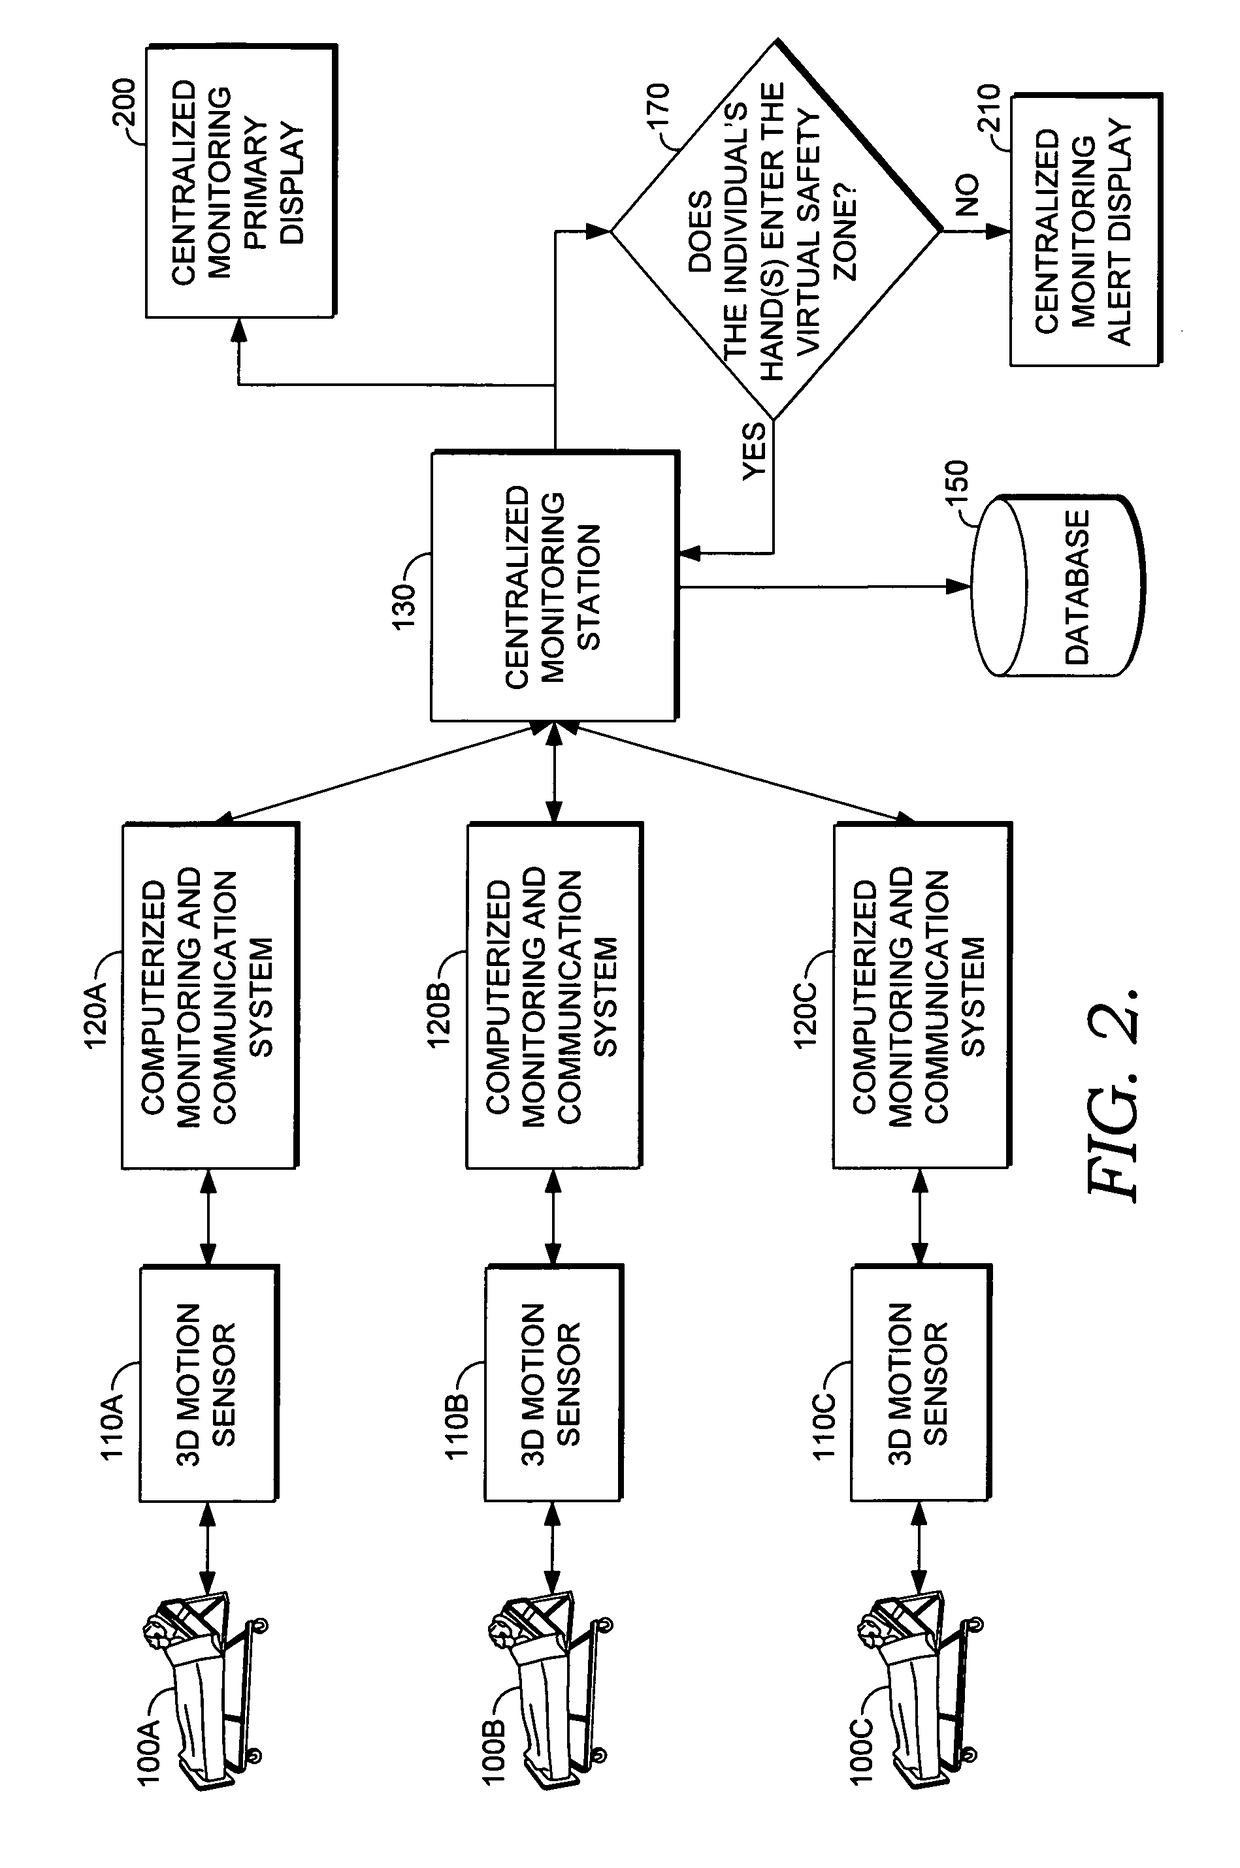 Method and system for determining whether a monitored individual's hand(s) have entered a virtual safety zone